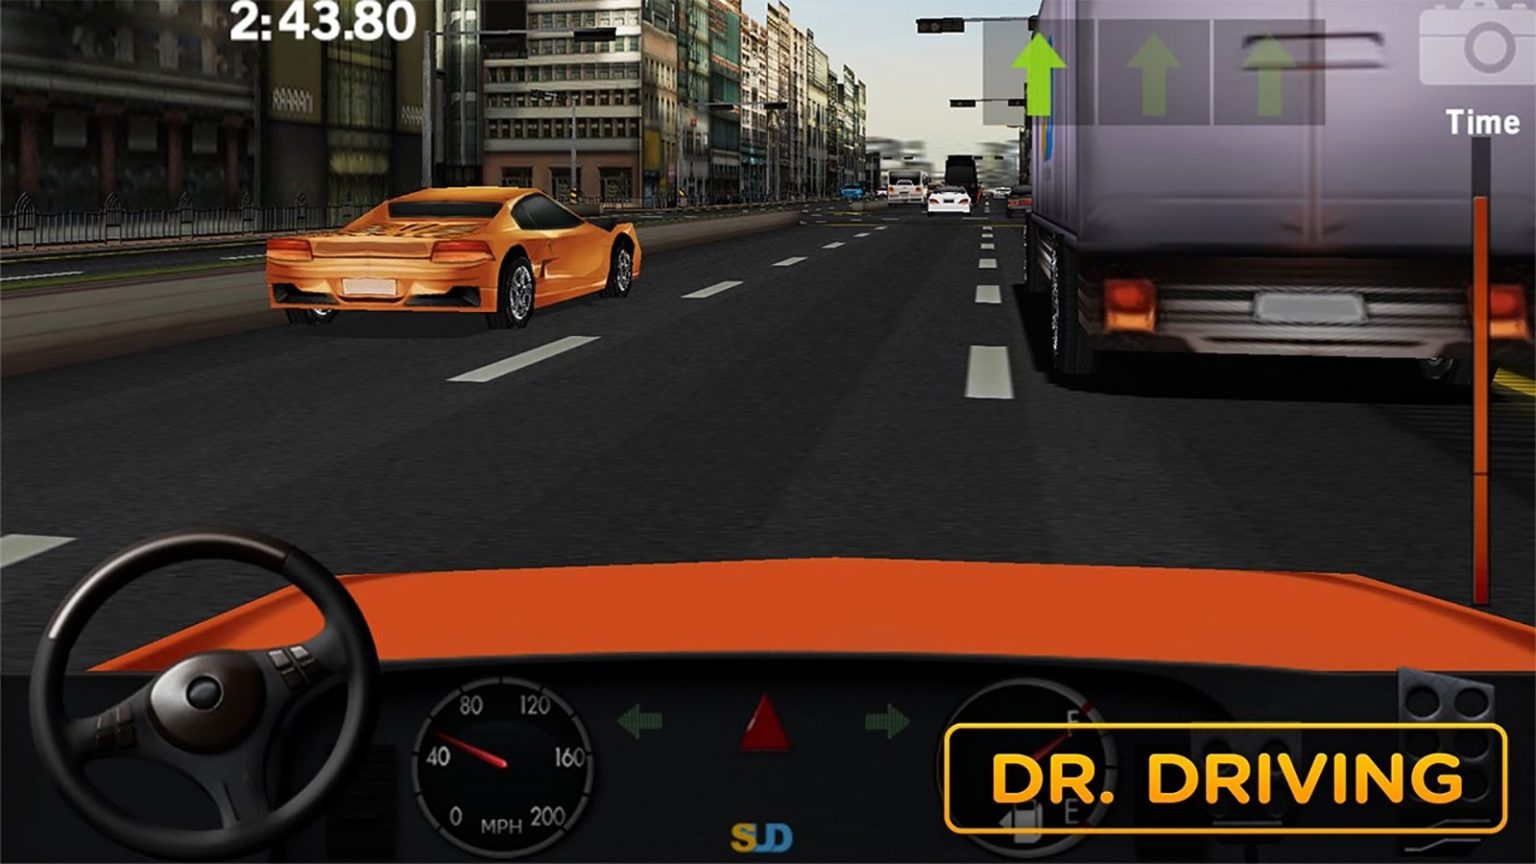 Dr. Driving Mod Apk 1.57 (Unlimited Money, Unlocked) Free Download